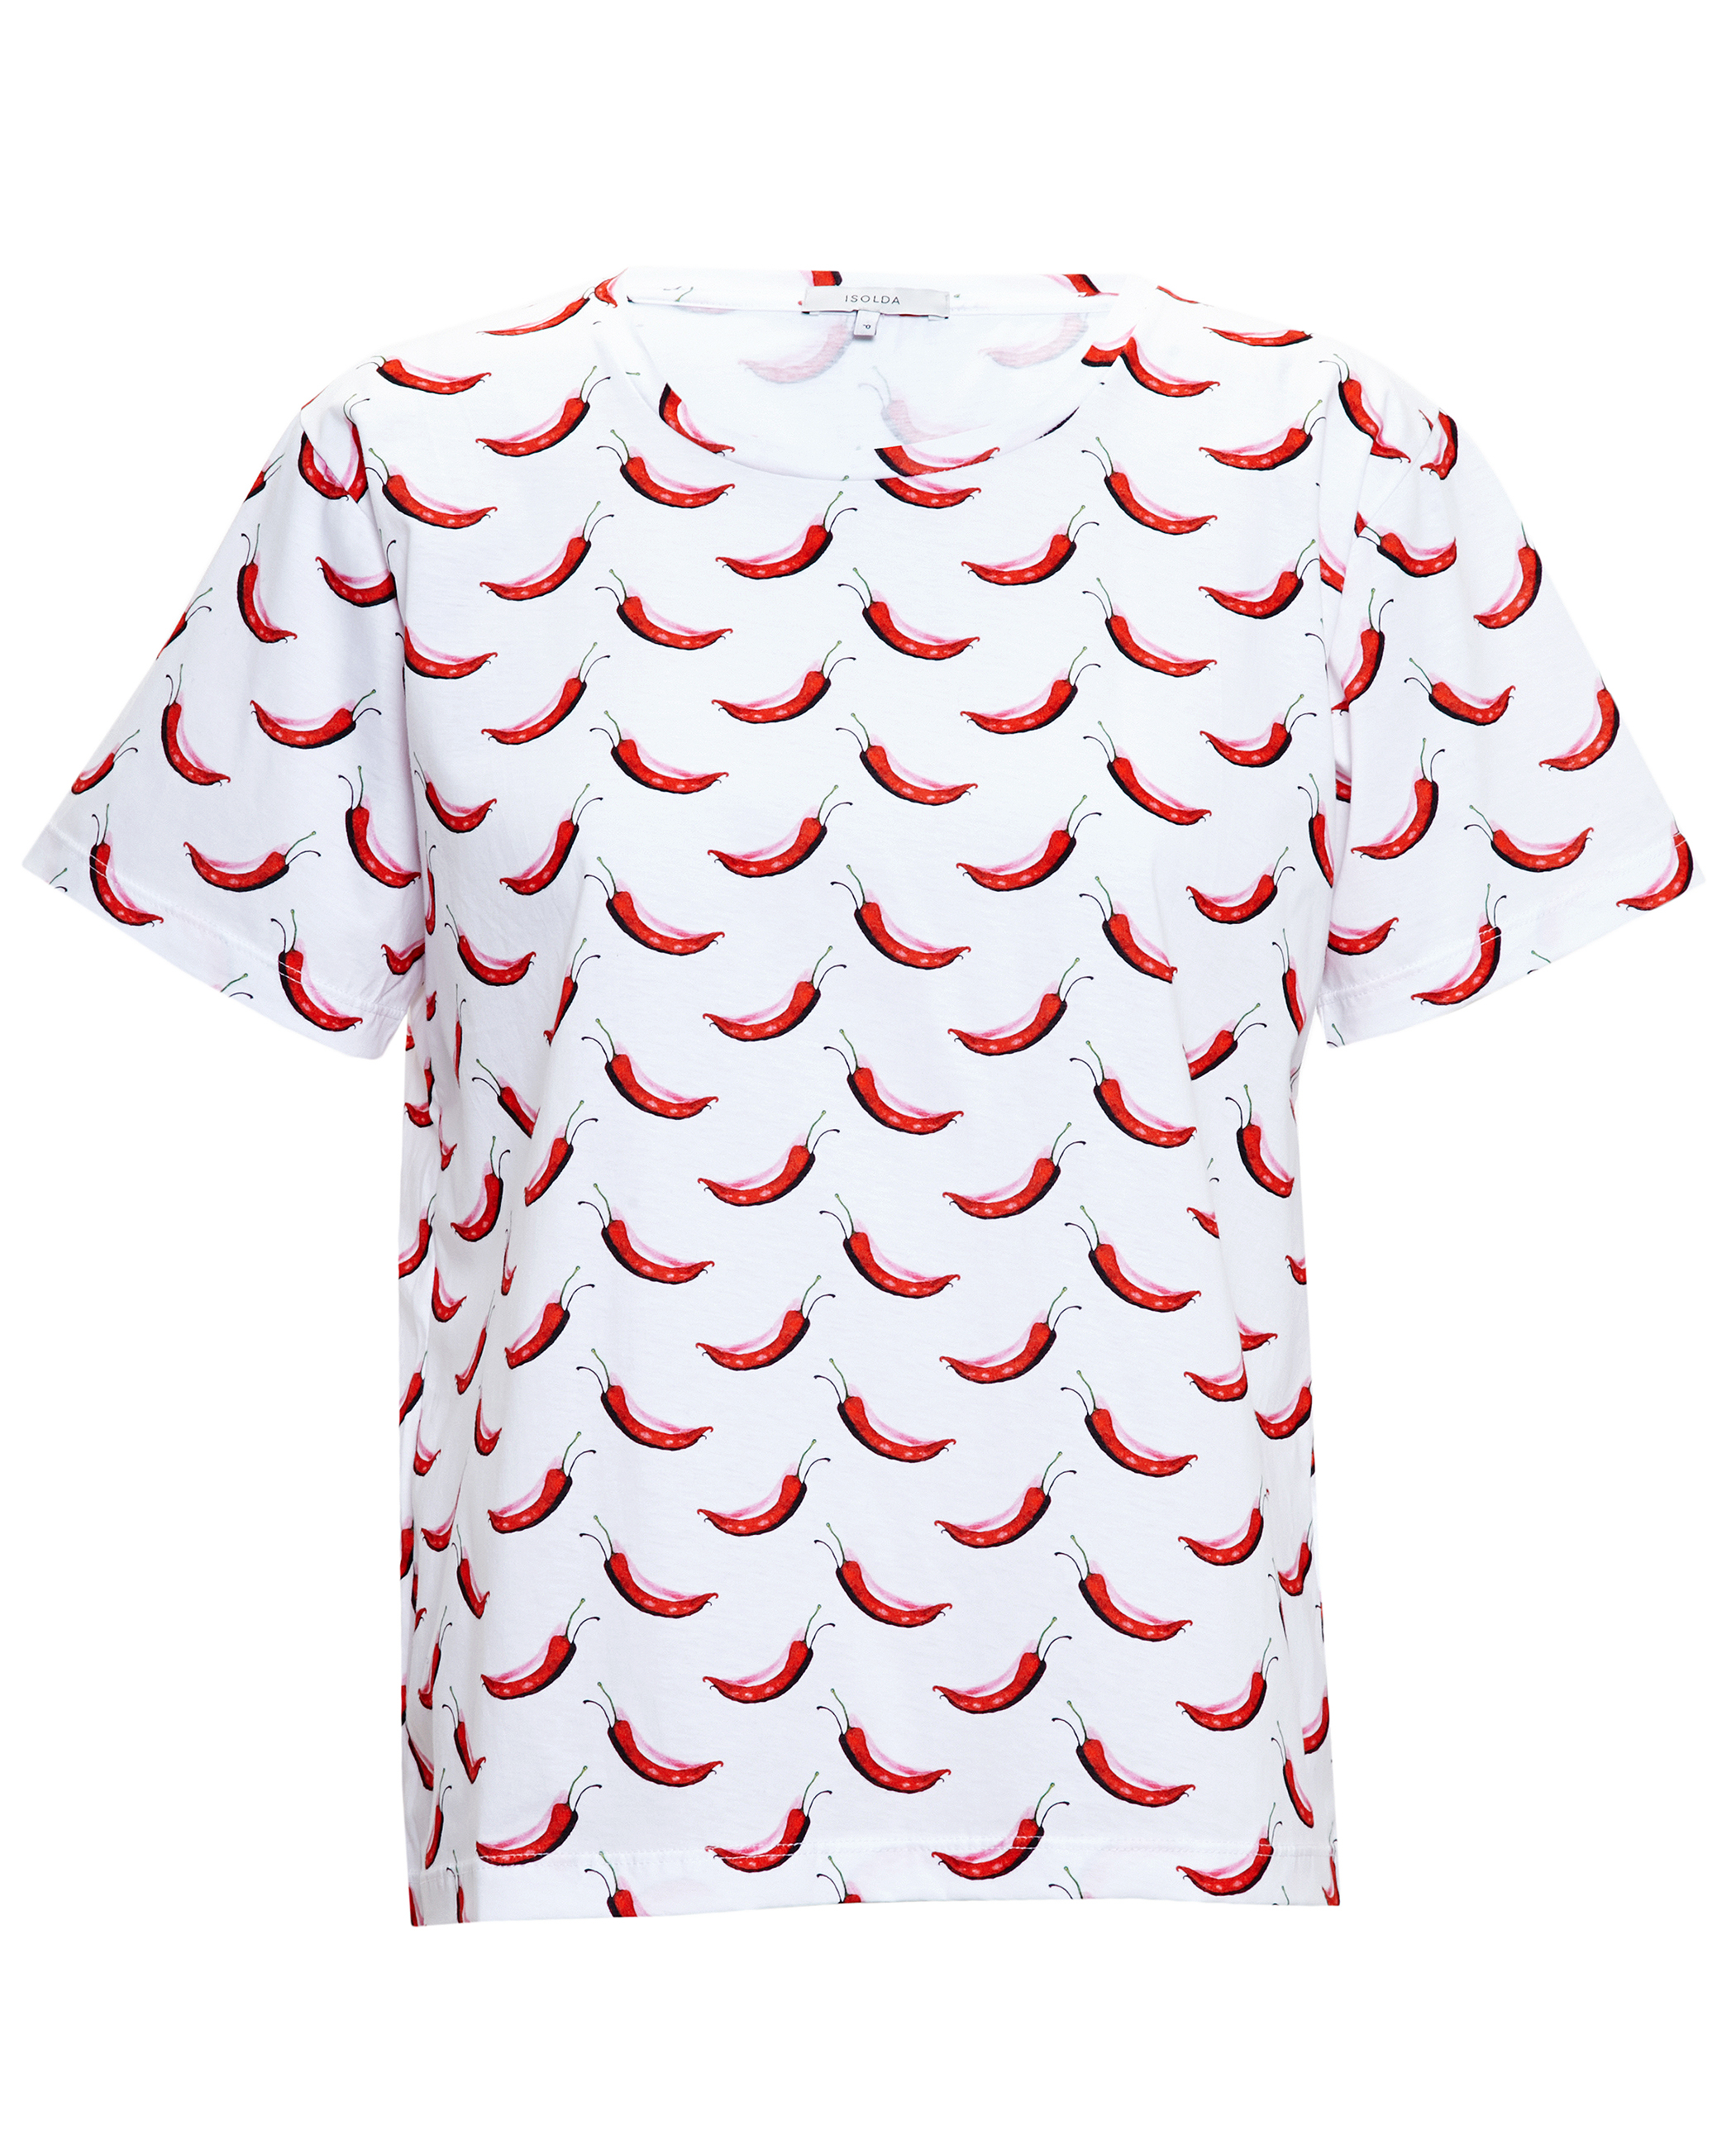 Isolda Chilli Print T-shirt in Red White (Red) | Lyst